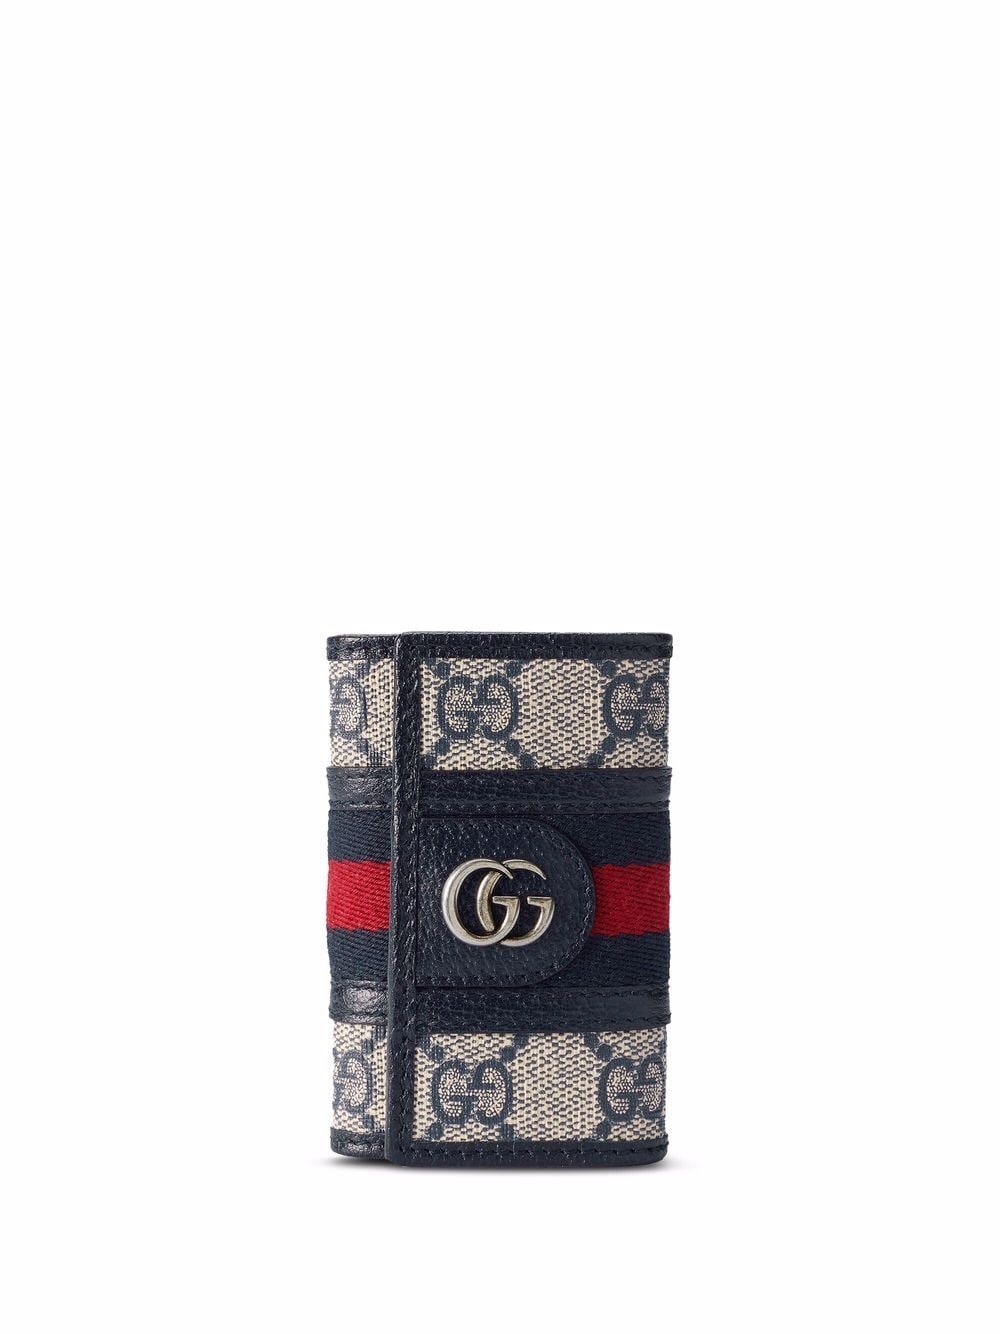 Gucci Ophidia Jumbo GG Key Case in Natural